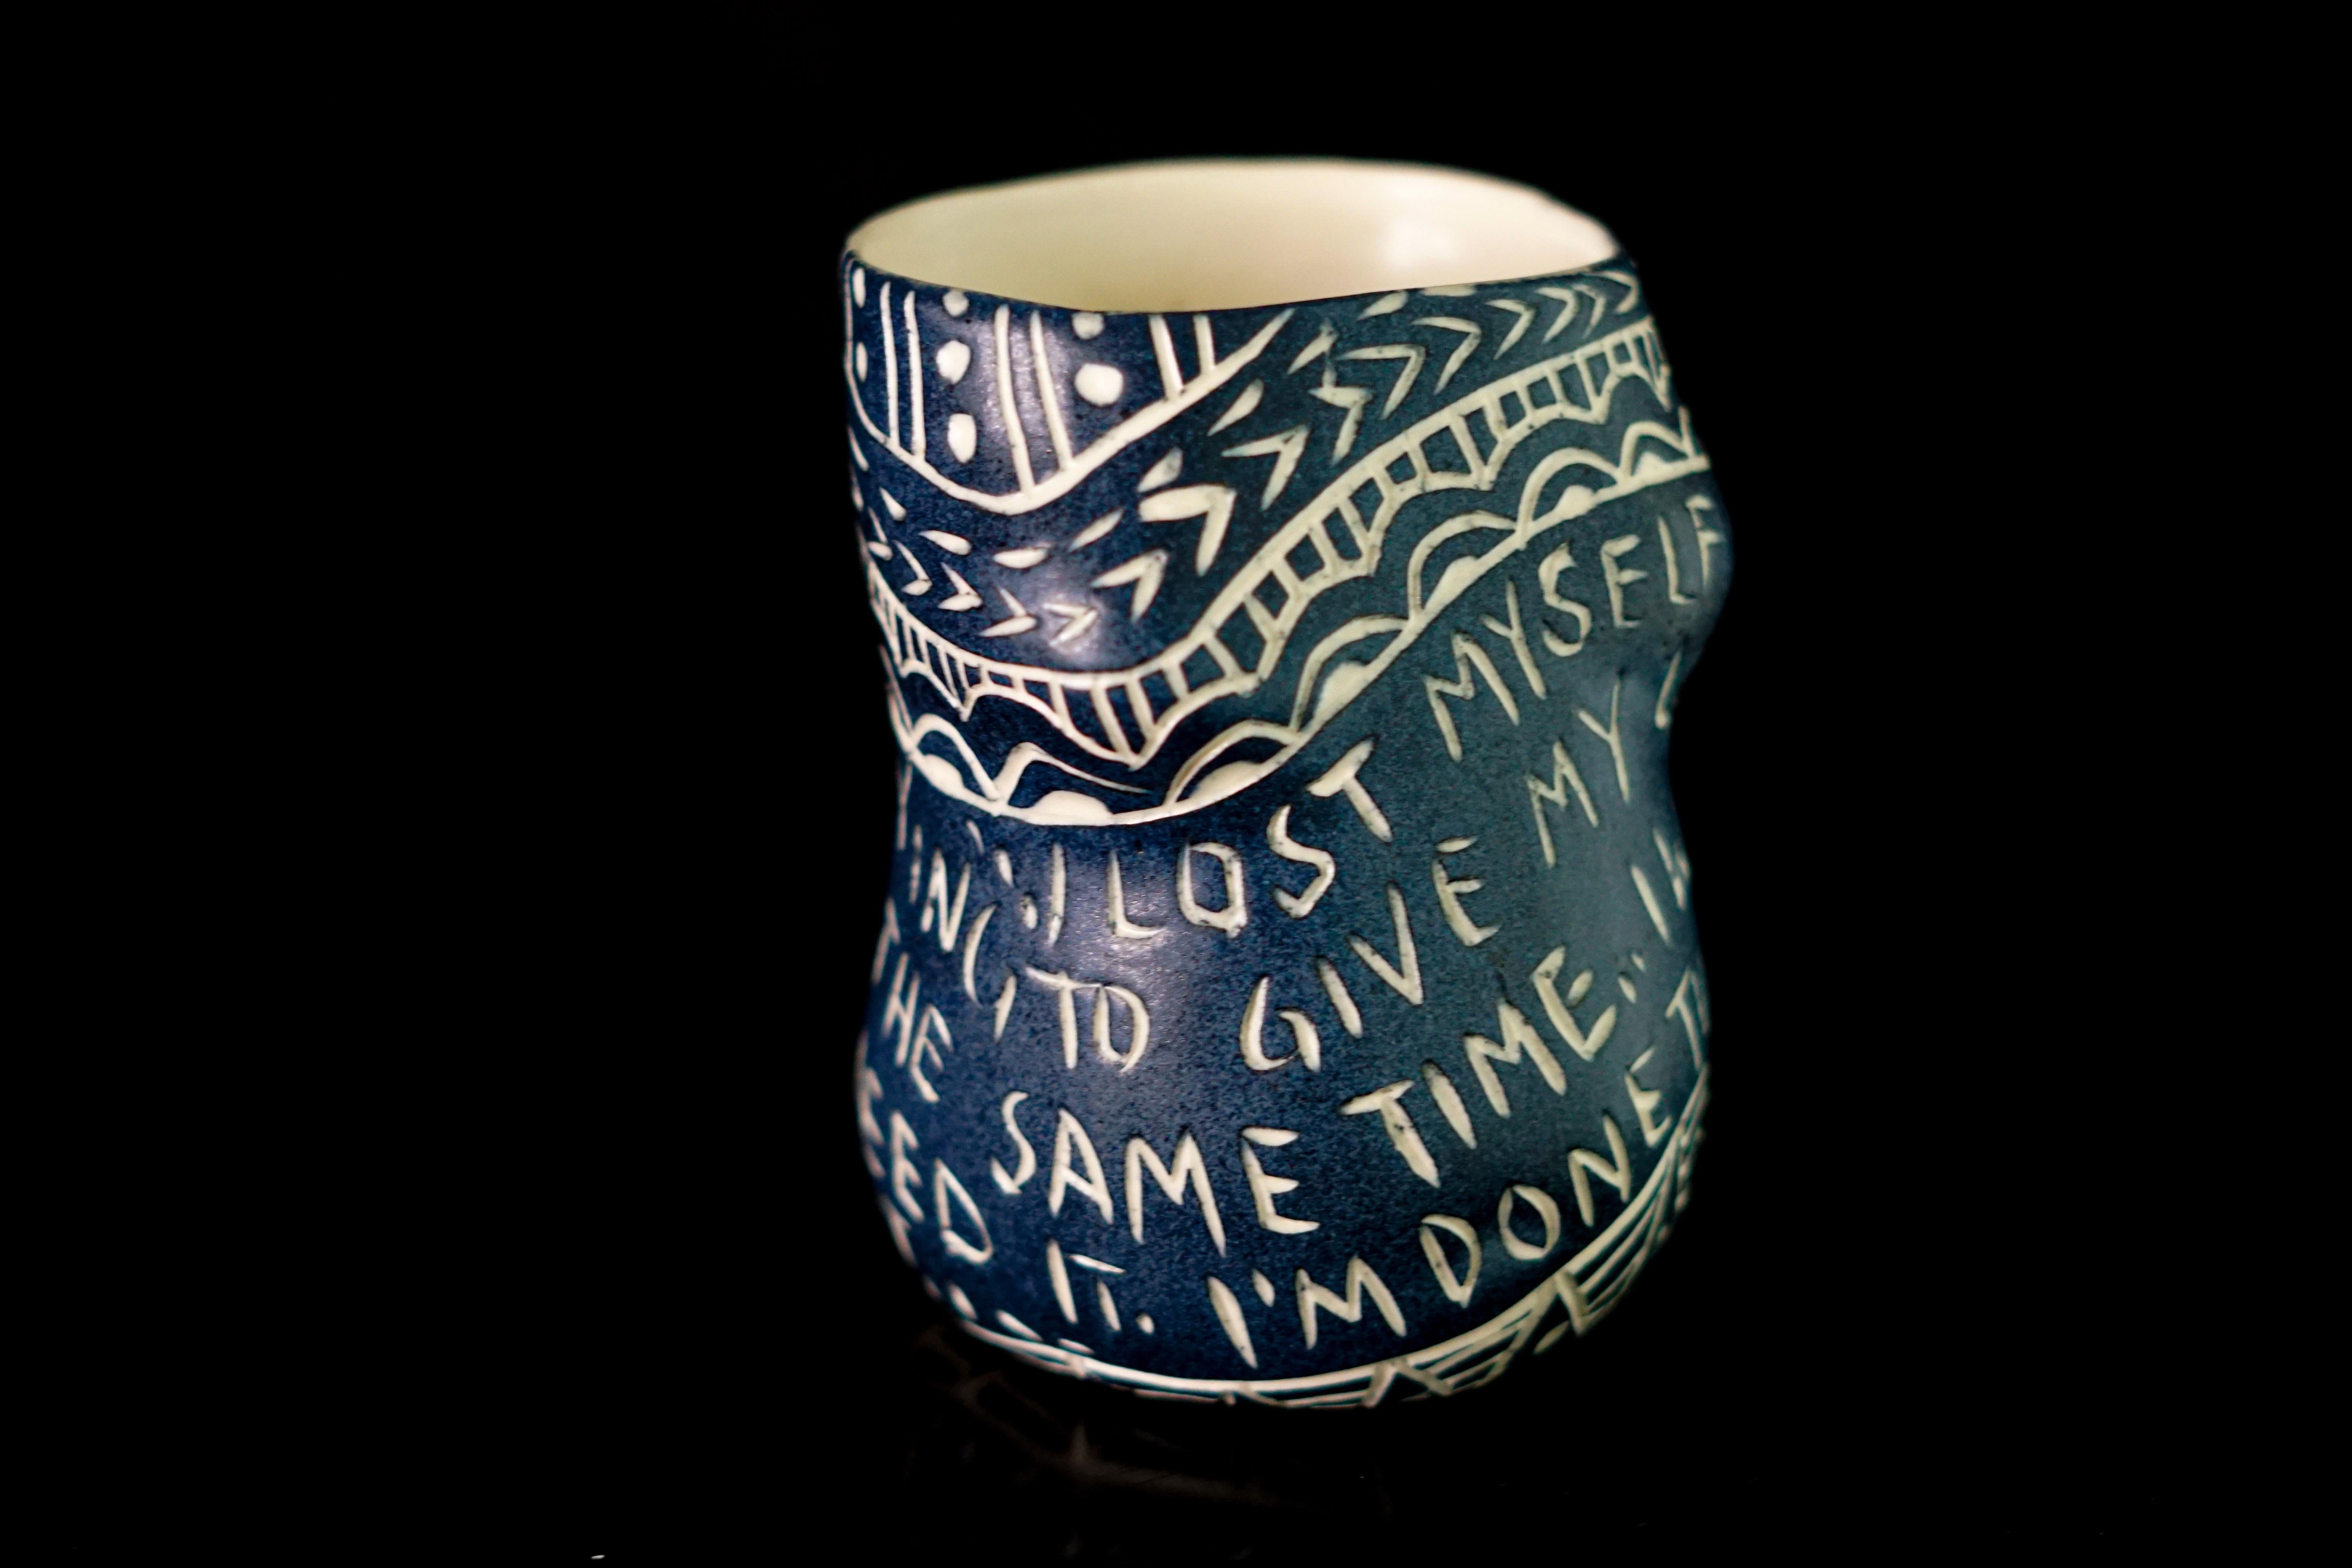 I lost myself., 2019 by Alex Hodge
From the series Fragments of Our Love Story
Porcelain cup with sgraffito detailing
4 in. x 3 in. W x 2.75 in.

This cup is one of 48 that make up the installation, “Fragments of Our Love Story.” These cups feature